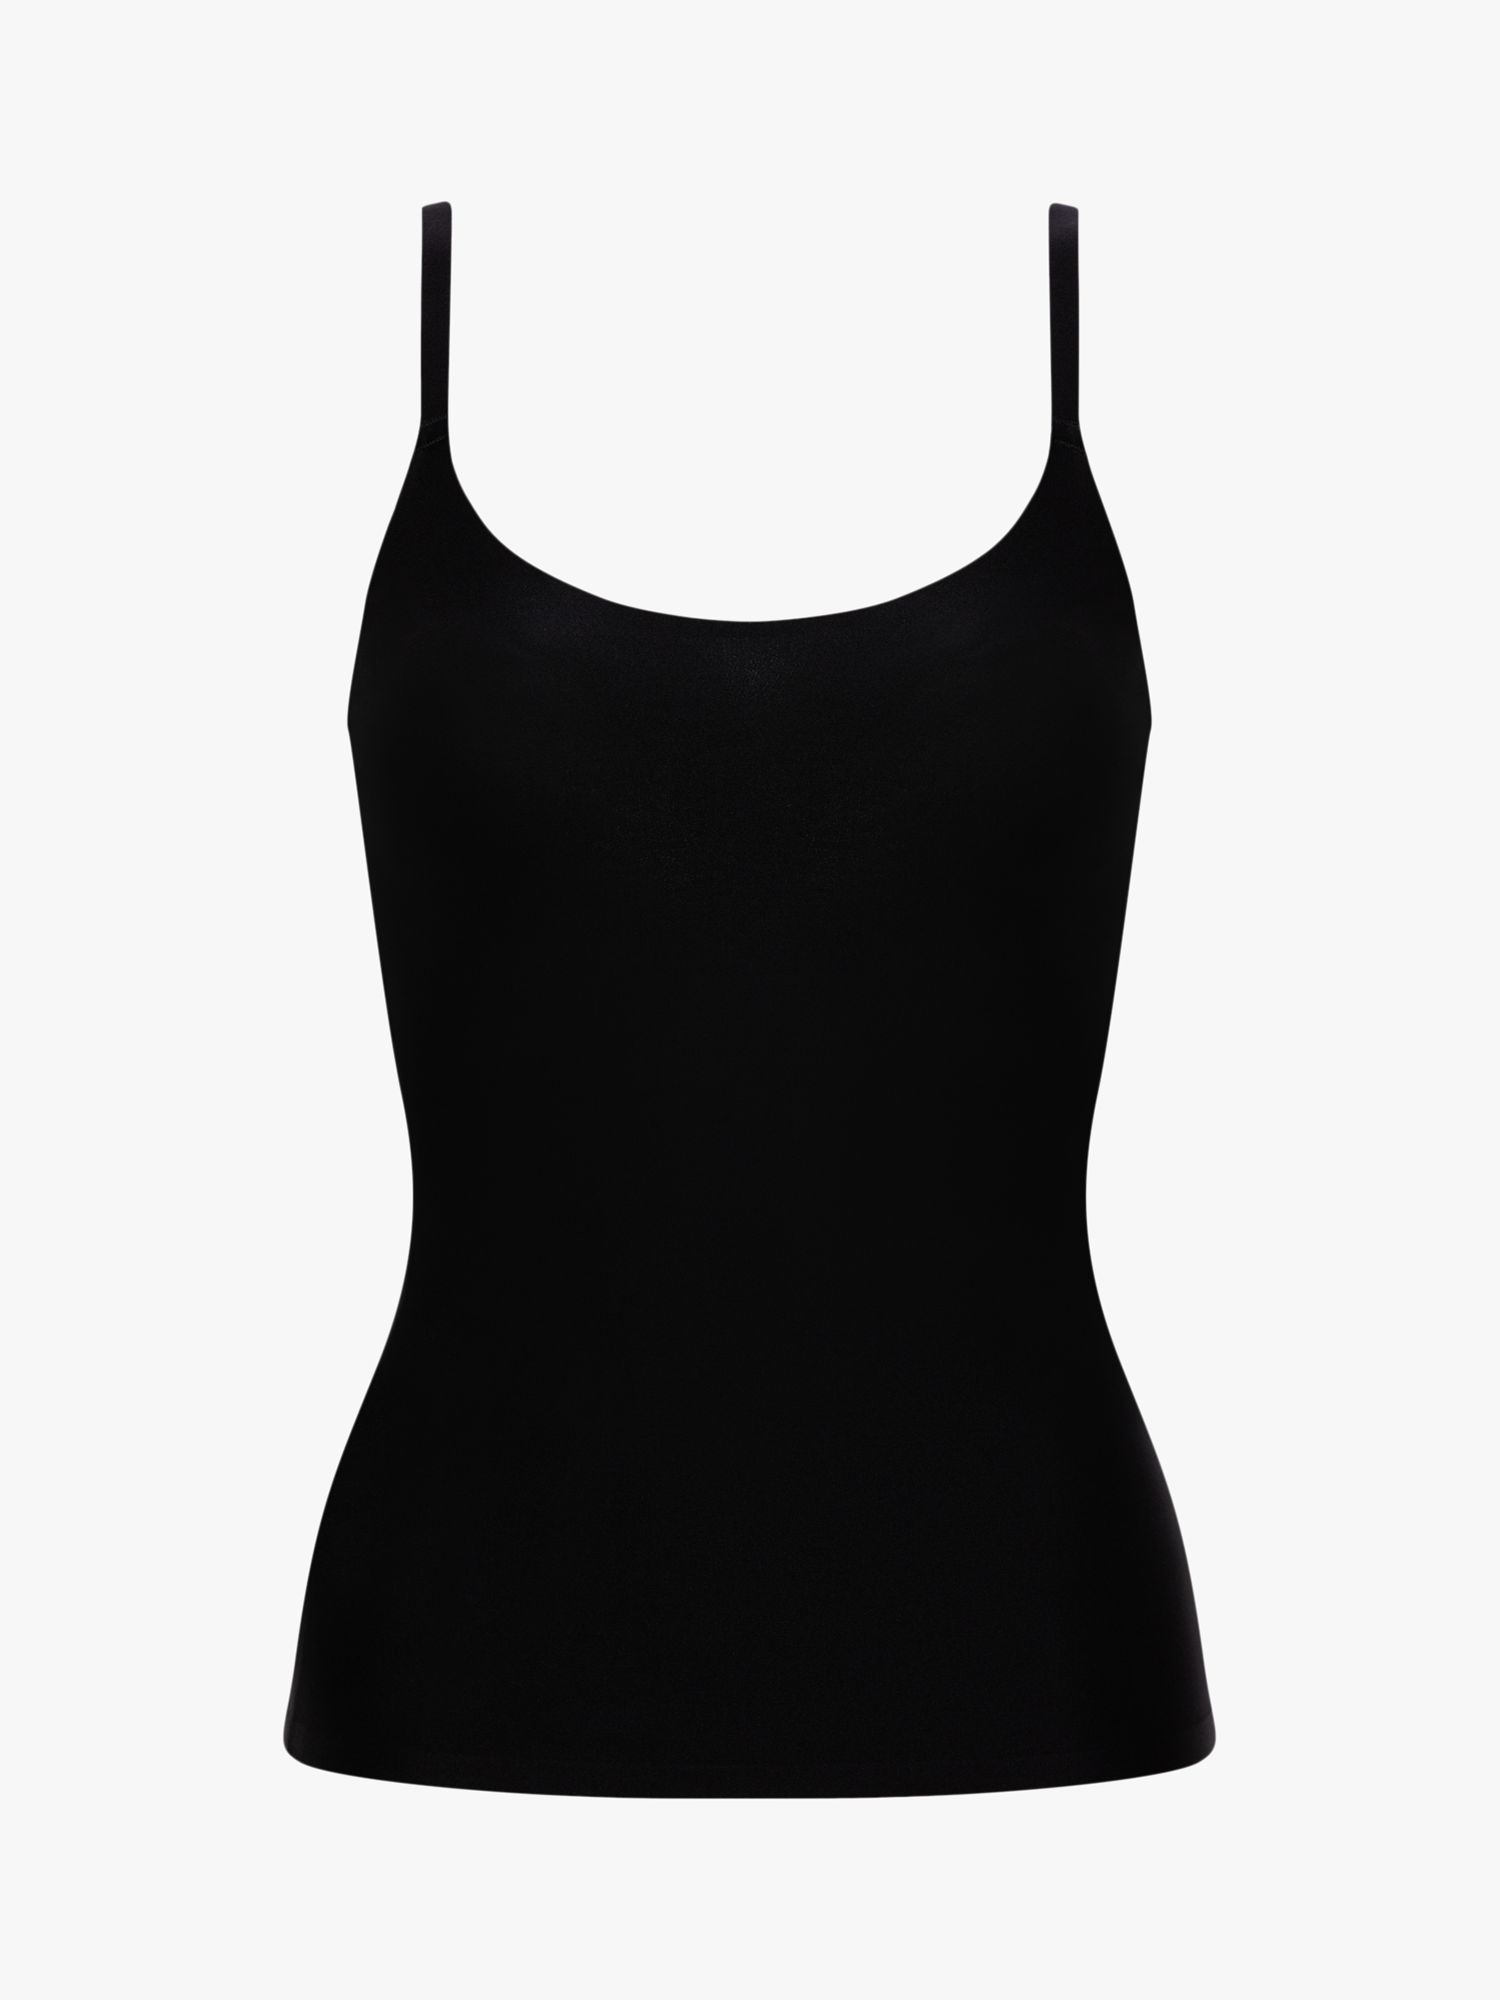 Padded Camisole: Comfortable Support for Everyday Wear